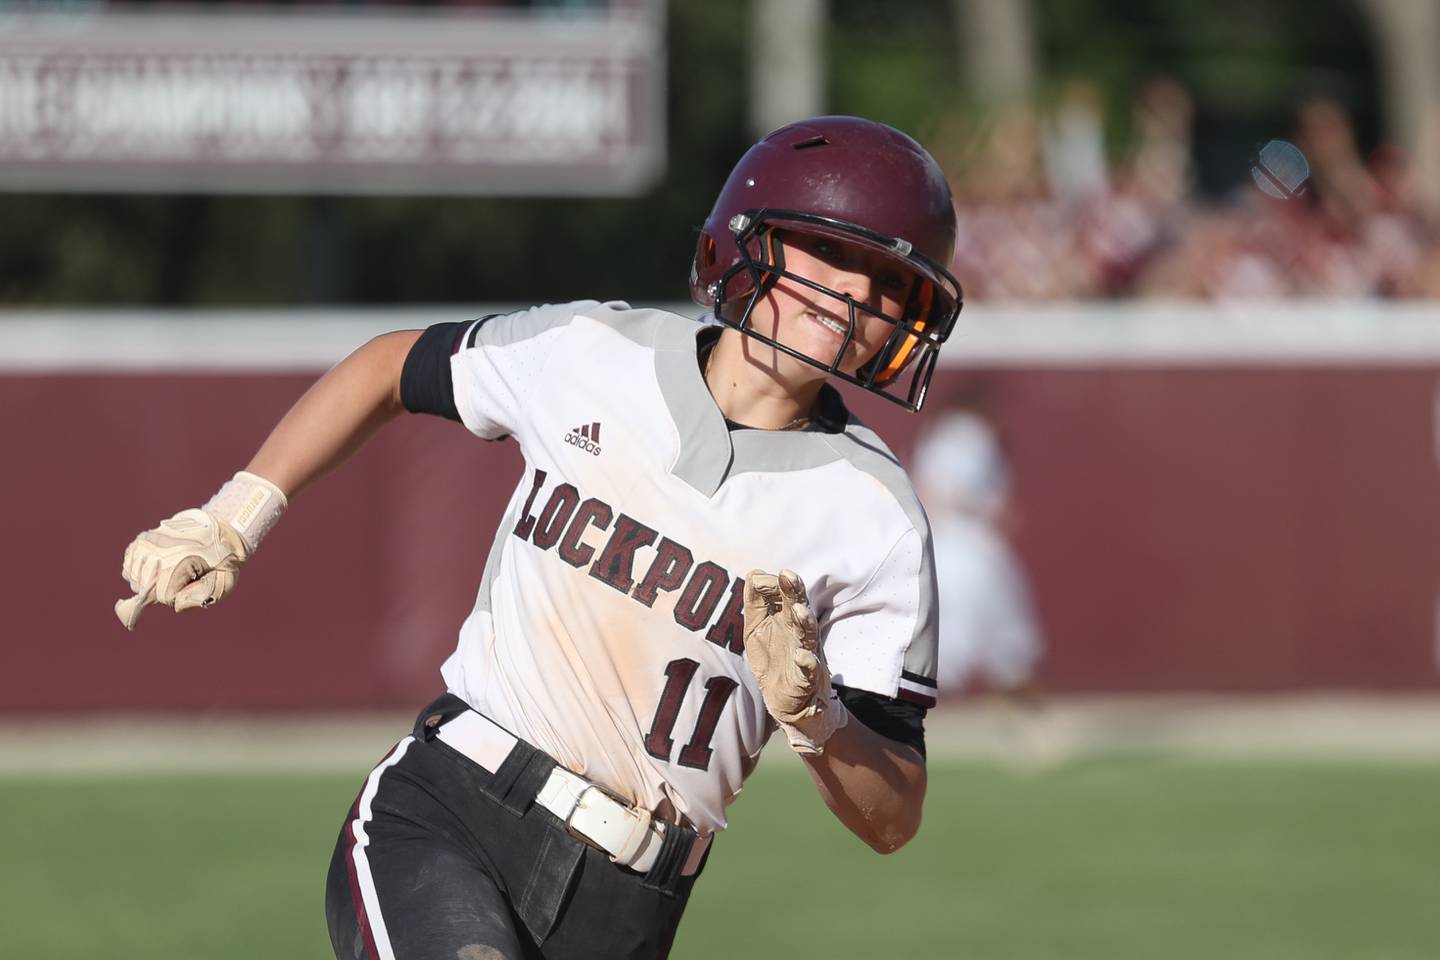 Lockport’s Addison Foster rounds third to score against Andrew in the Class 4A Lockport Regional Championship on Friday, May 26, 2023, in Lockport.